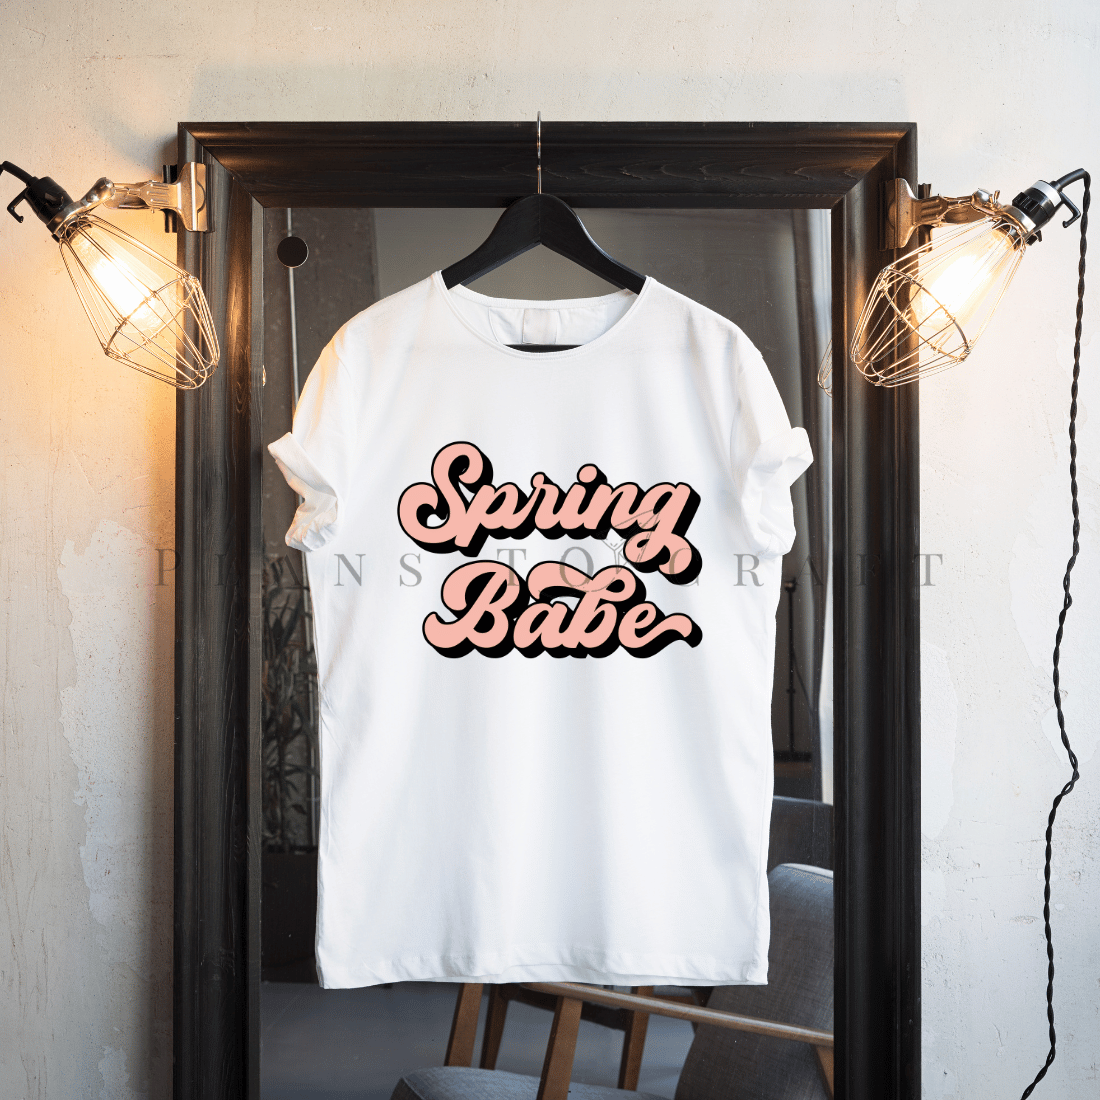 White t - shirt that says spring babe on it.